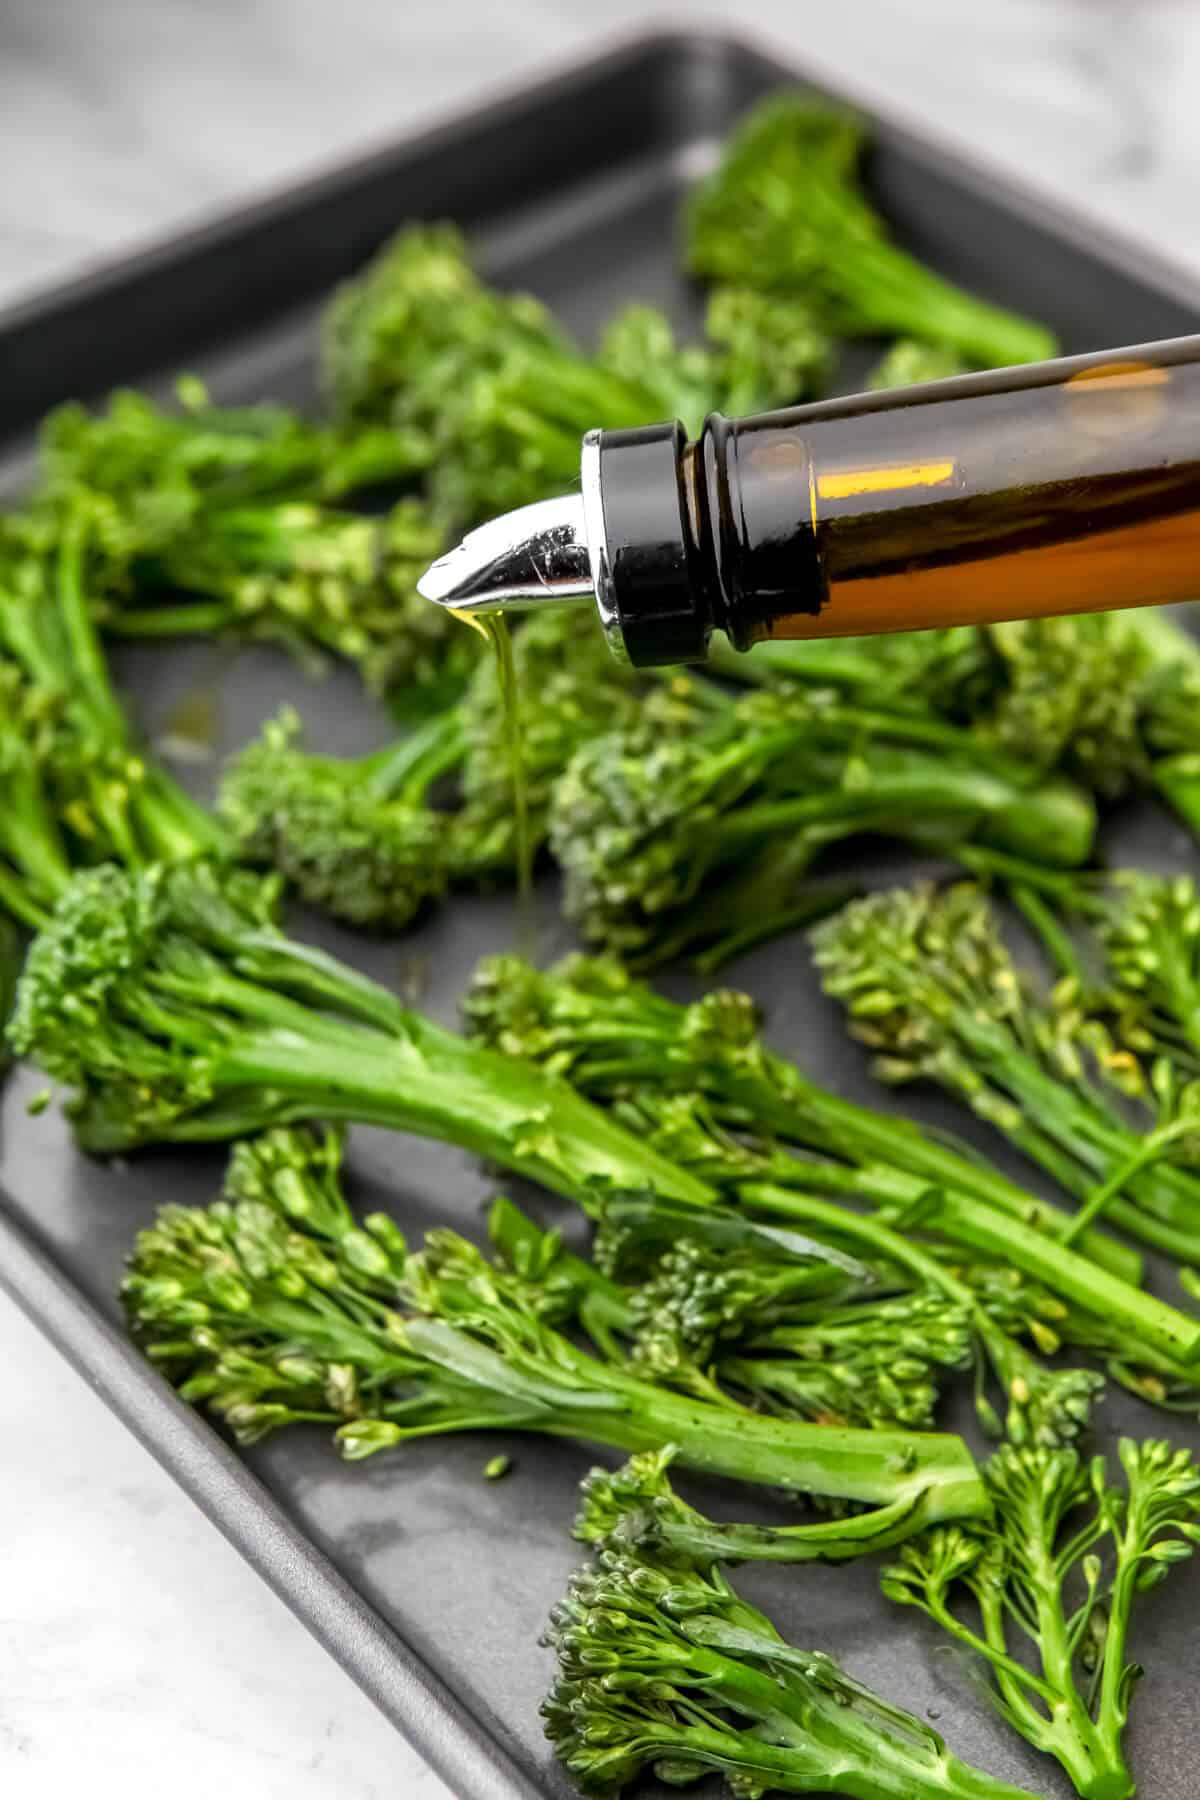 Raw tendersteam broccoli on a cookie sheet being drizzled with olive oil.